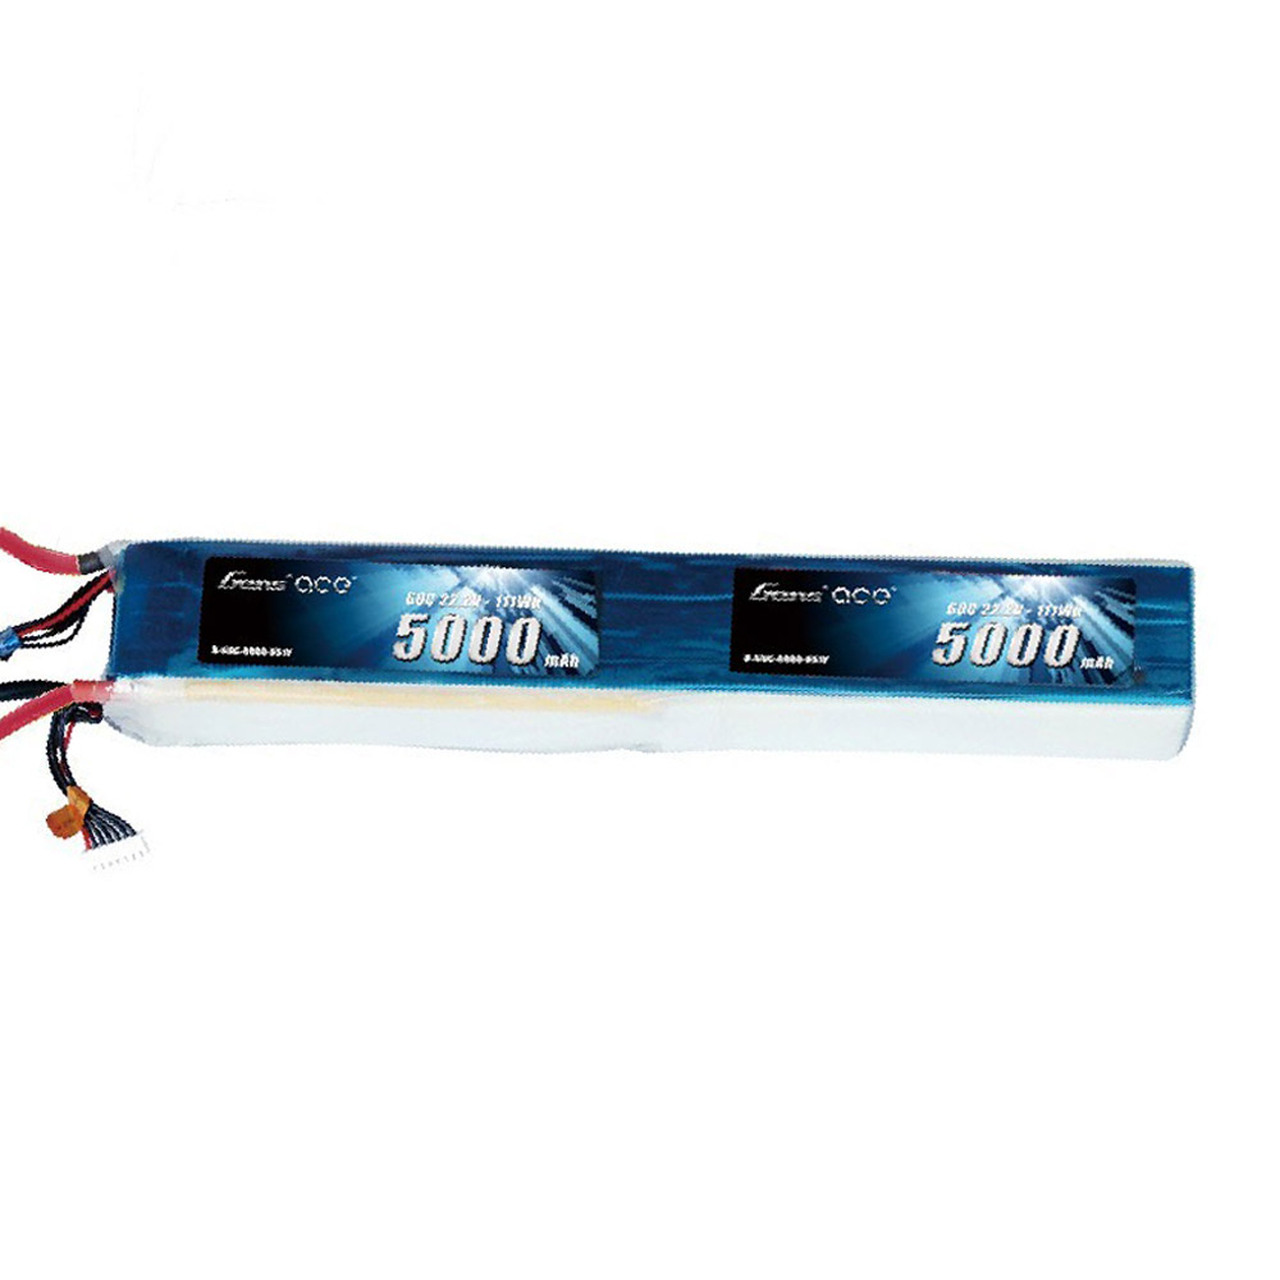 Gens ace 5000mAh 44.4V 60C 12S1P Lipo Battery Pack with no Plug